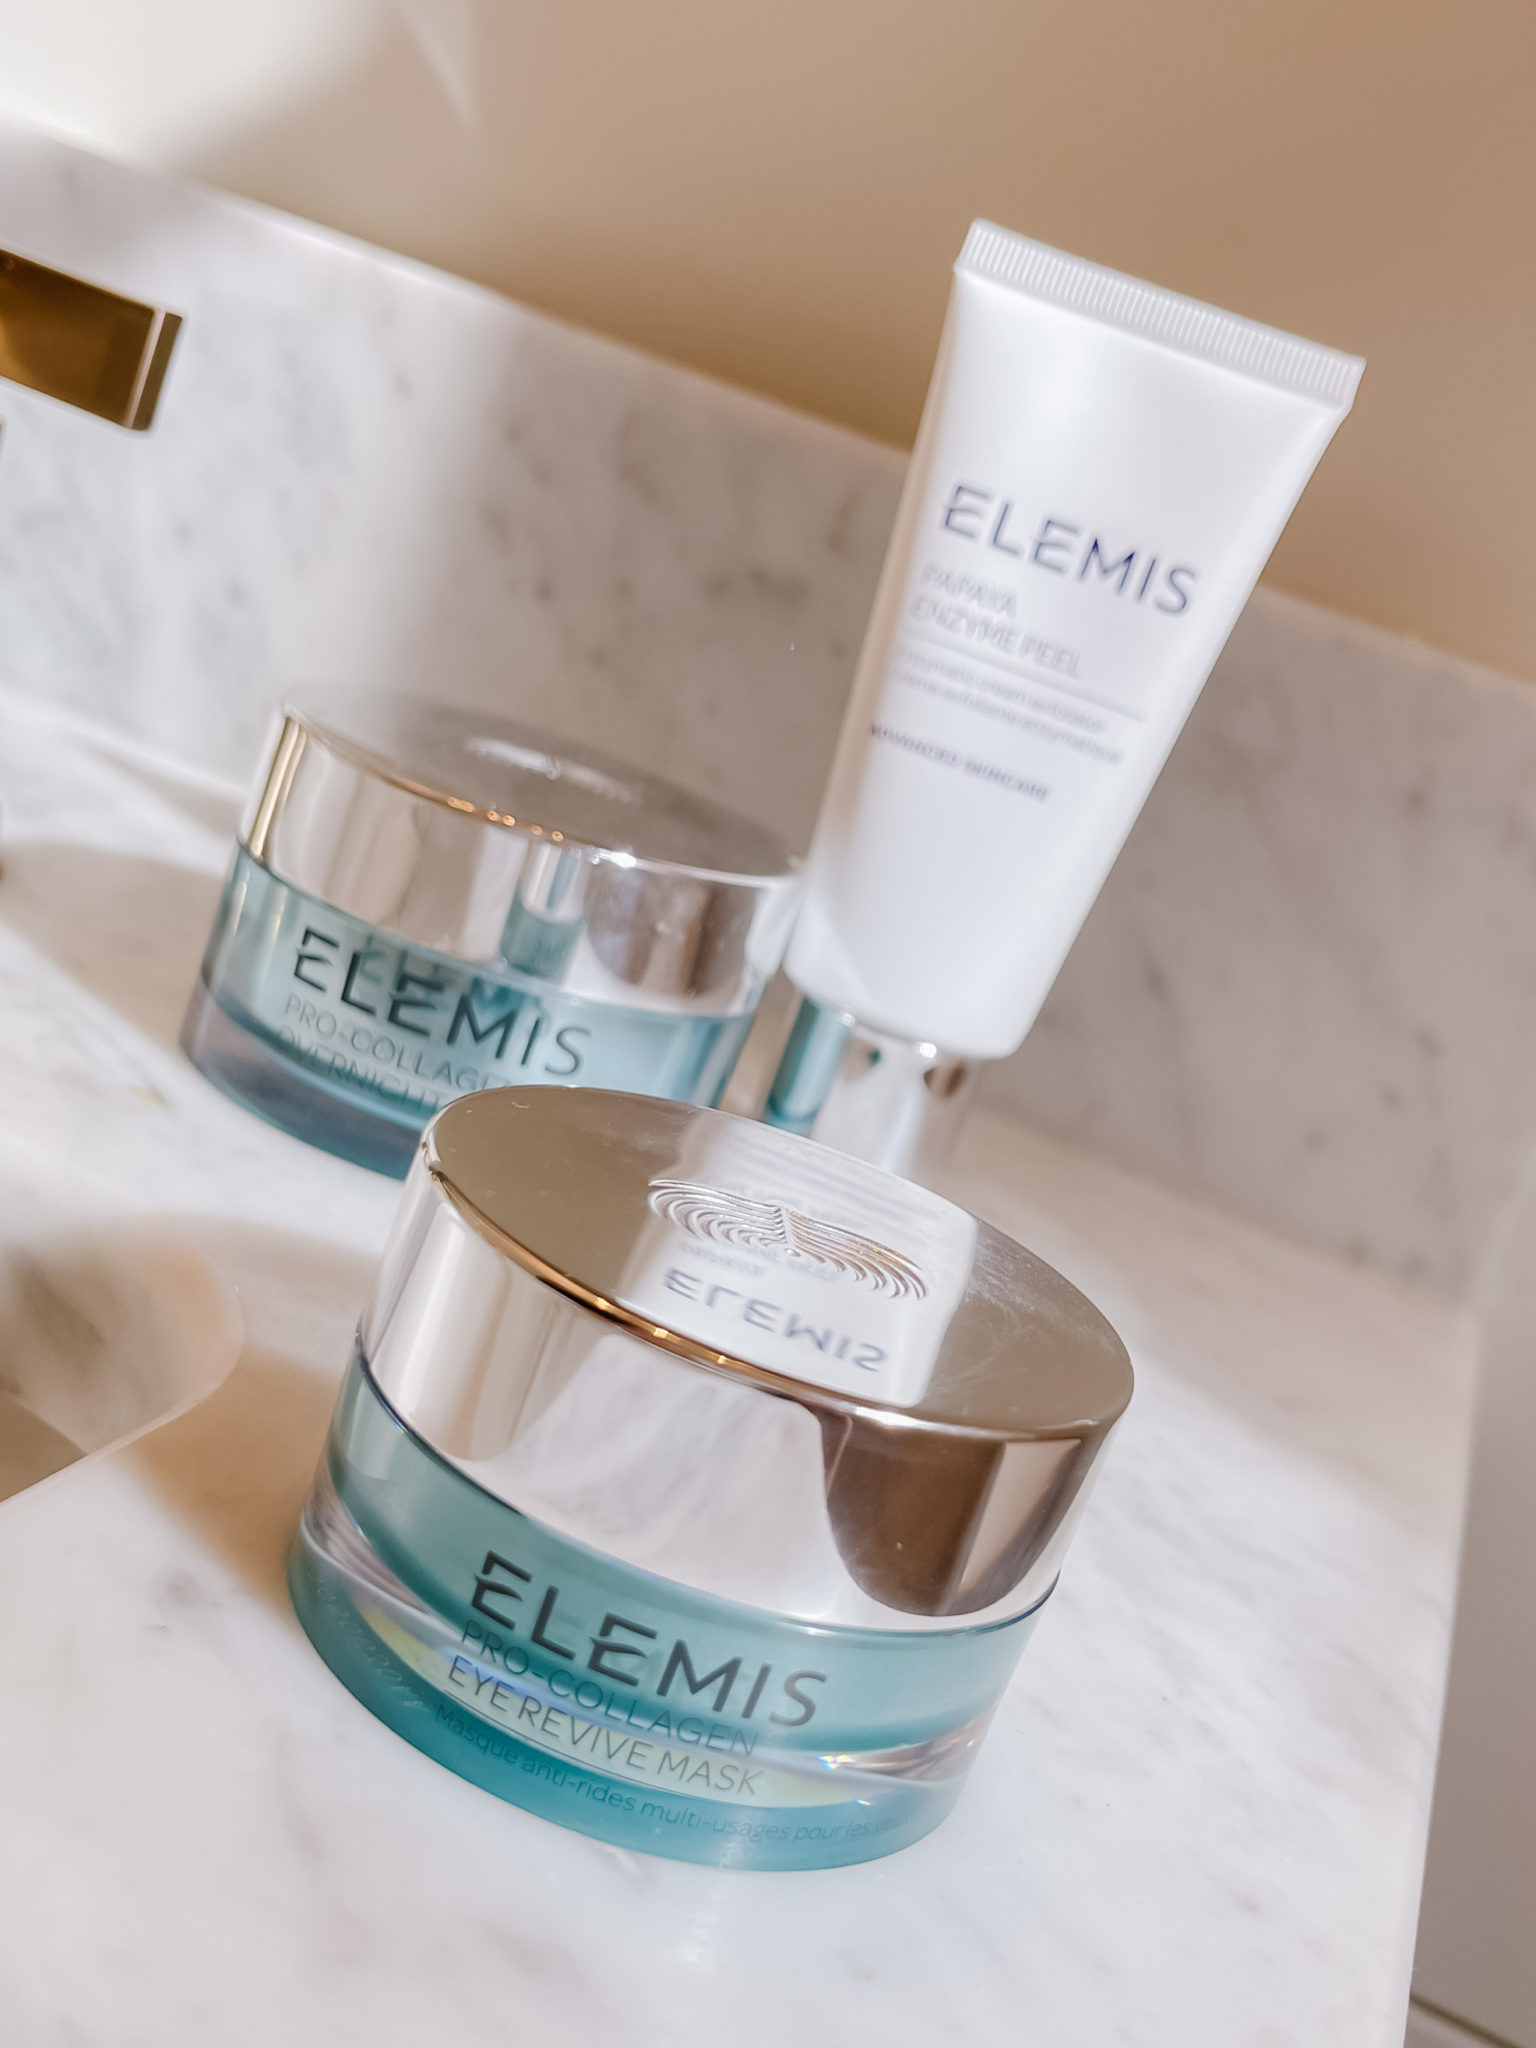 A Review of ELEMIS’ Pro Collagen Eye Revive Mask